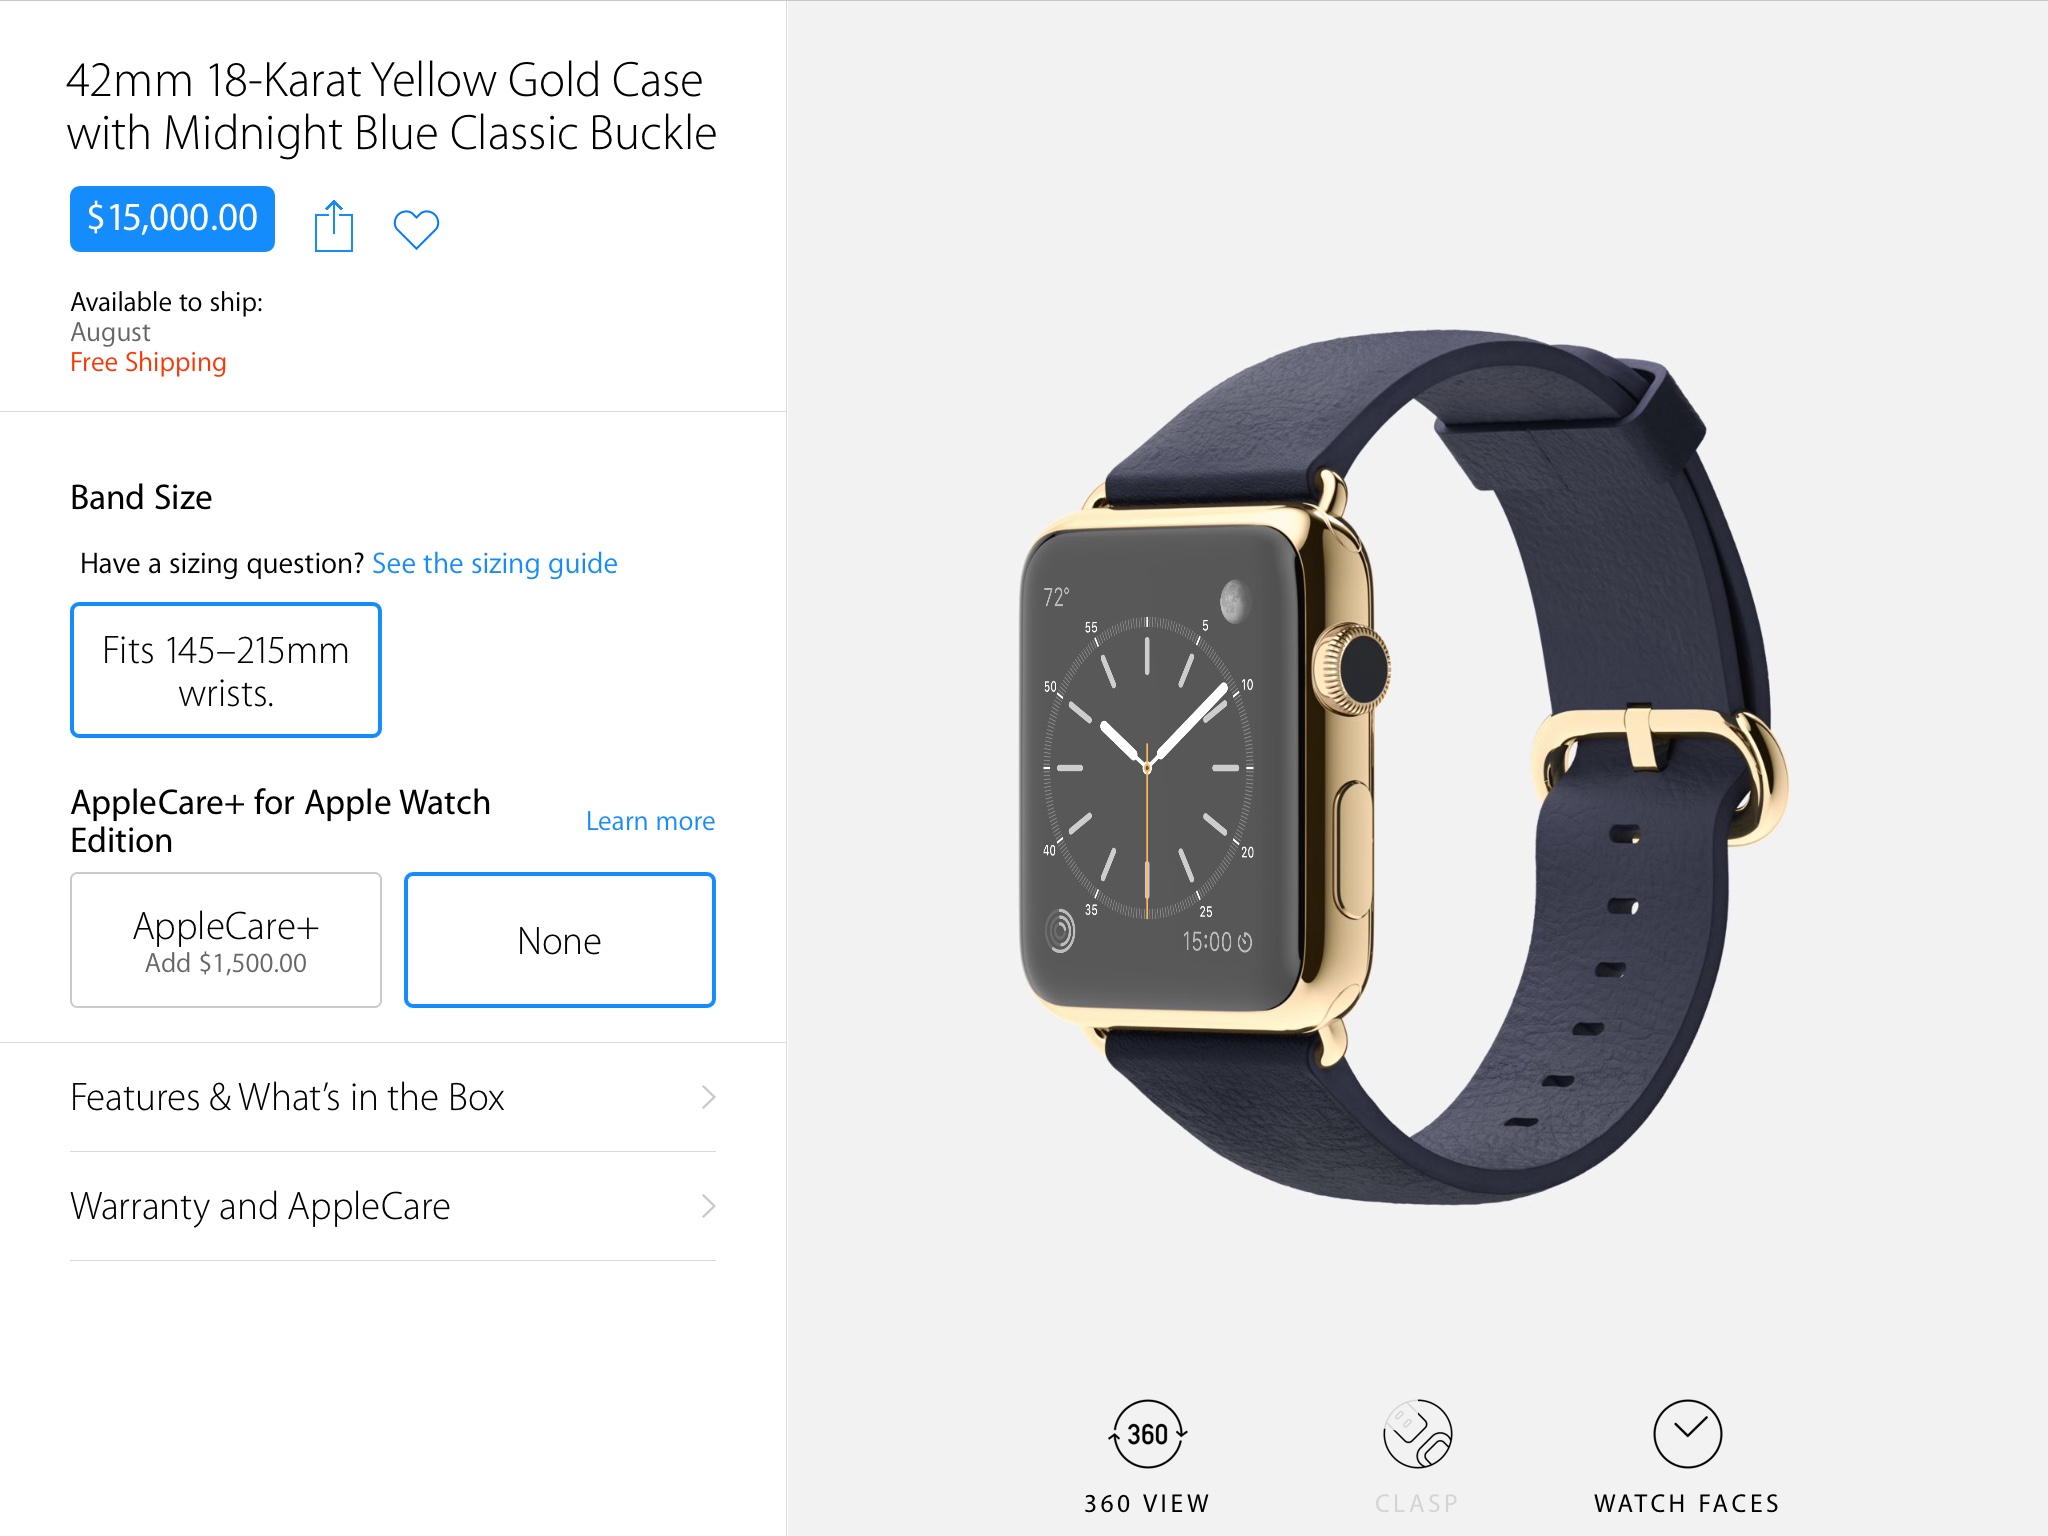 Apple Watch Edition Ships August 2015